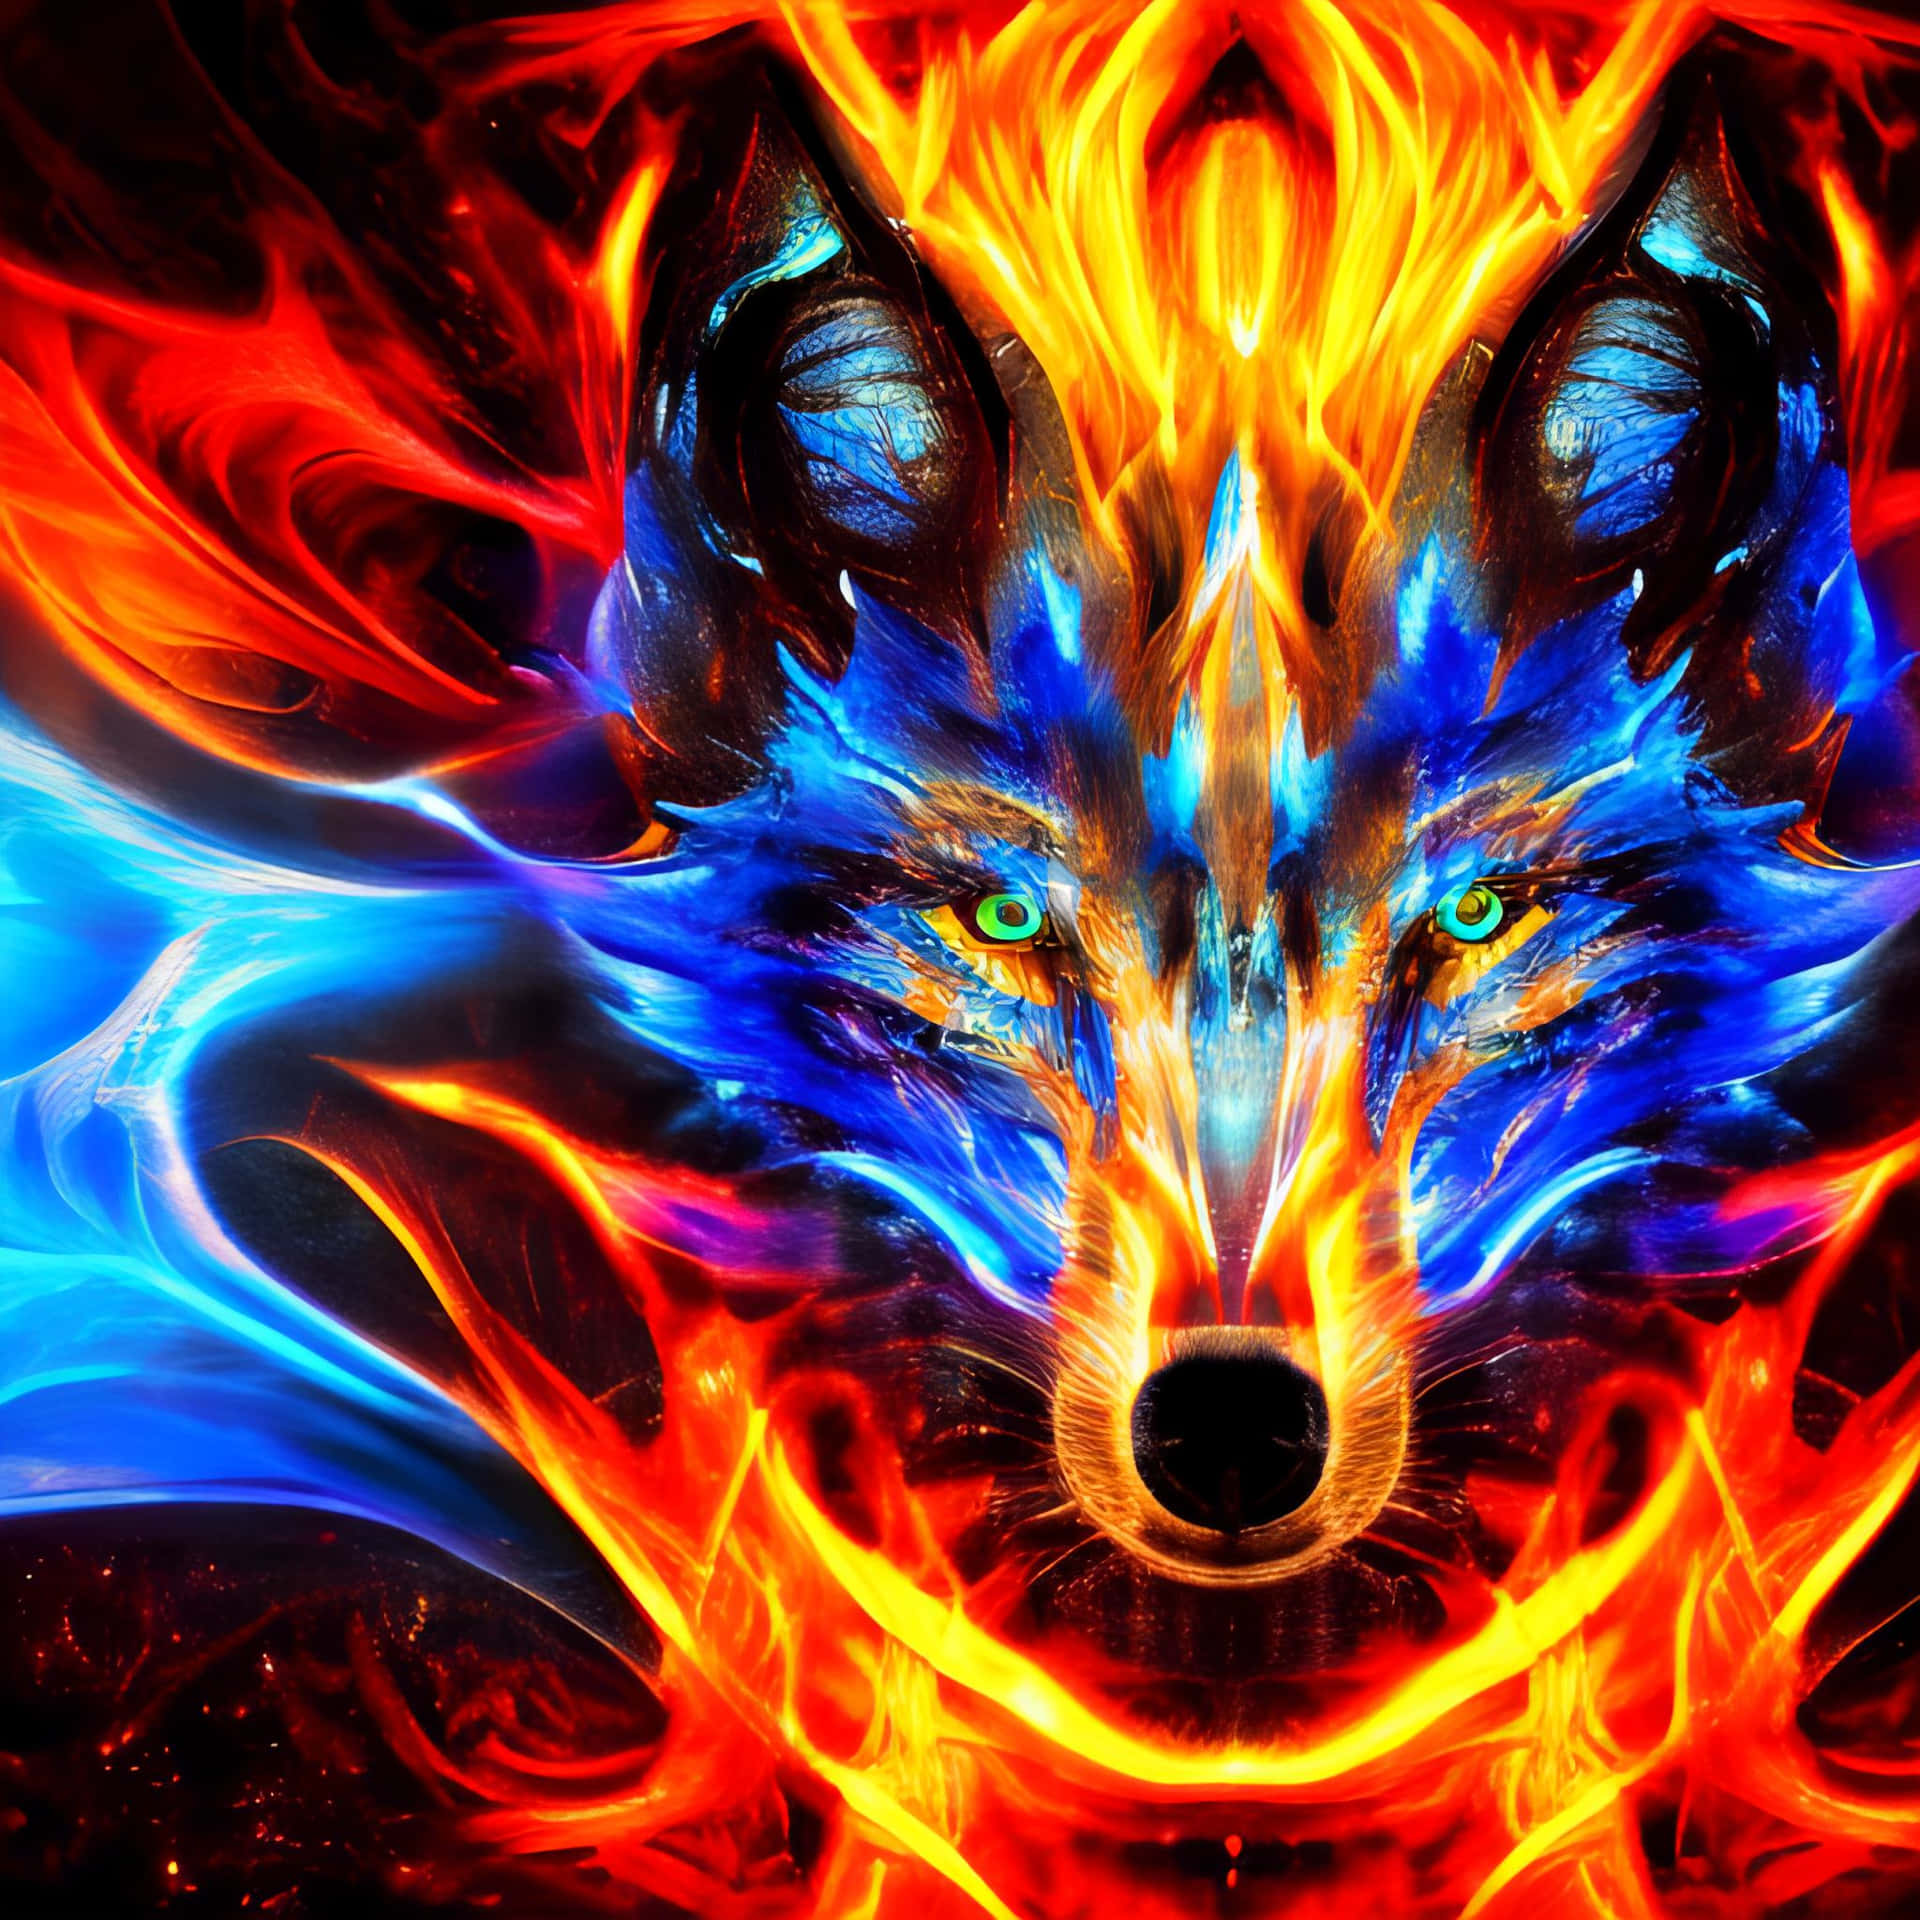 "The Beauty of Red and Blue Contrasts on a Majestic Wolf" Wallpaper